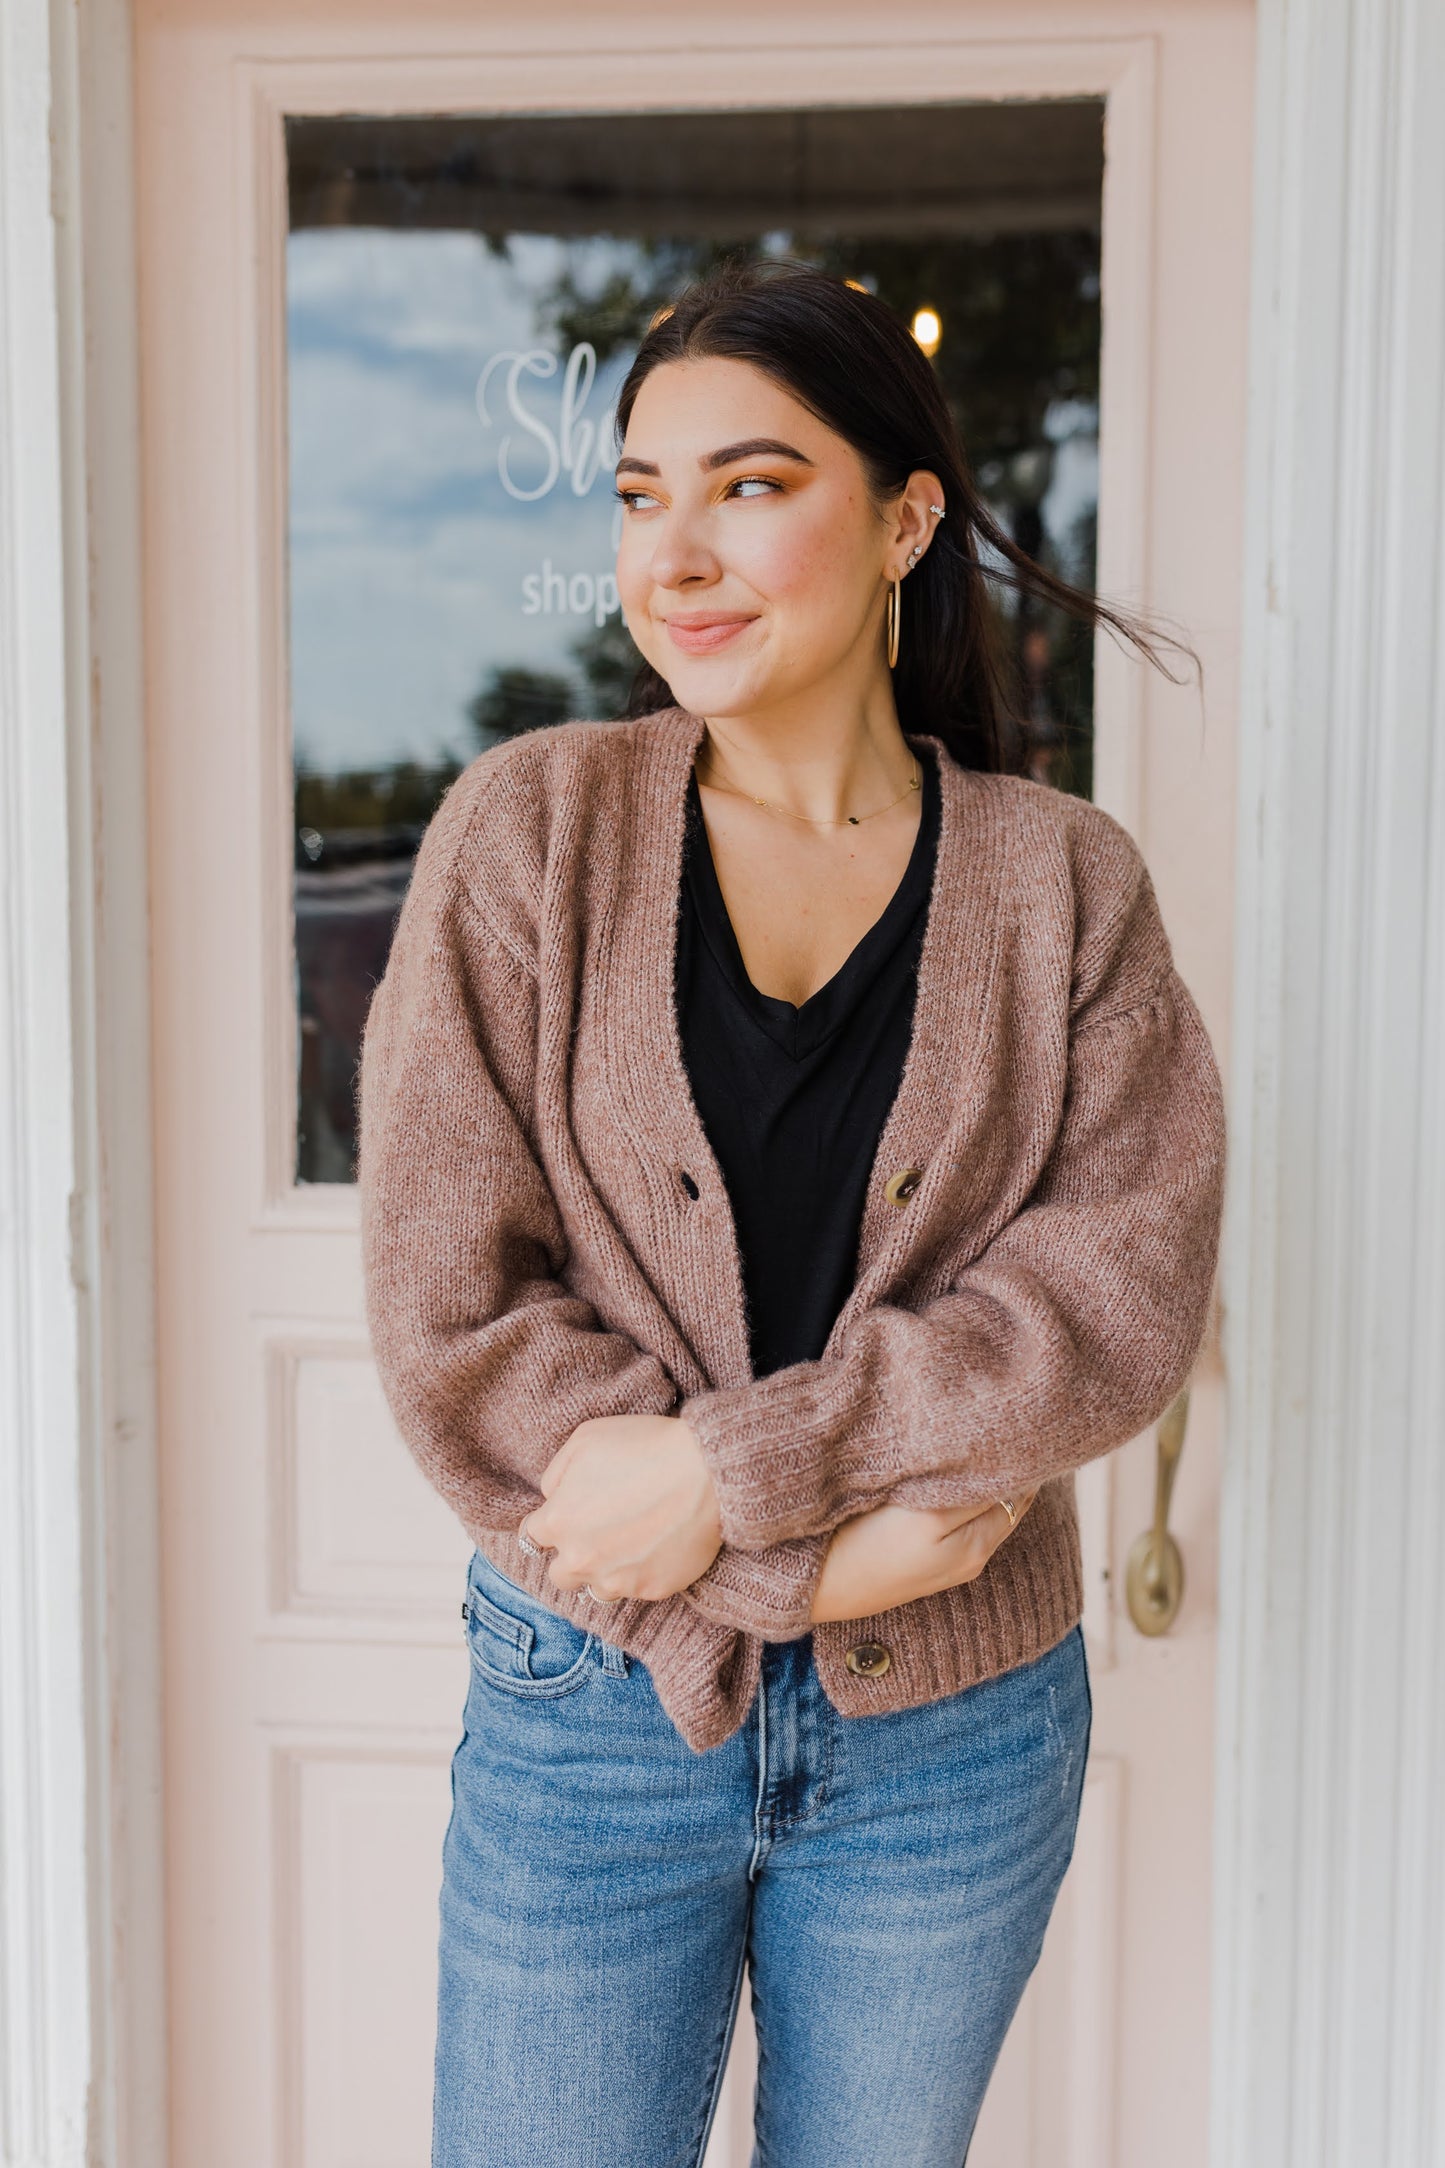 Grab the Cocoa Cozy Knit Cardigan